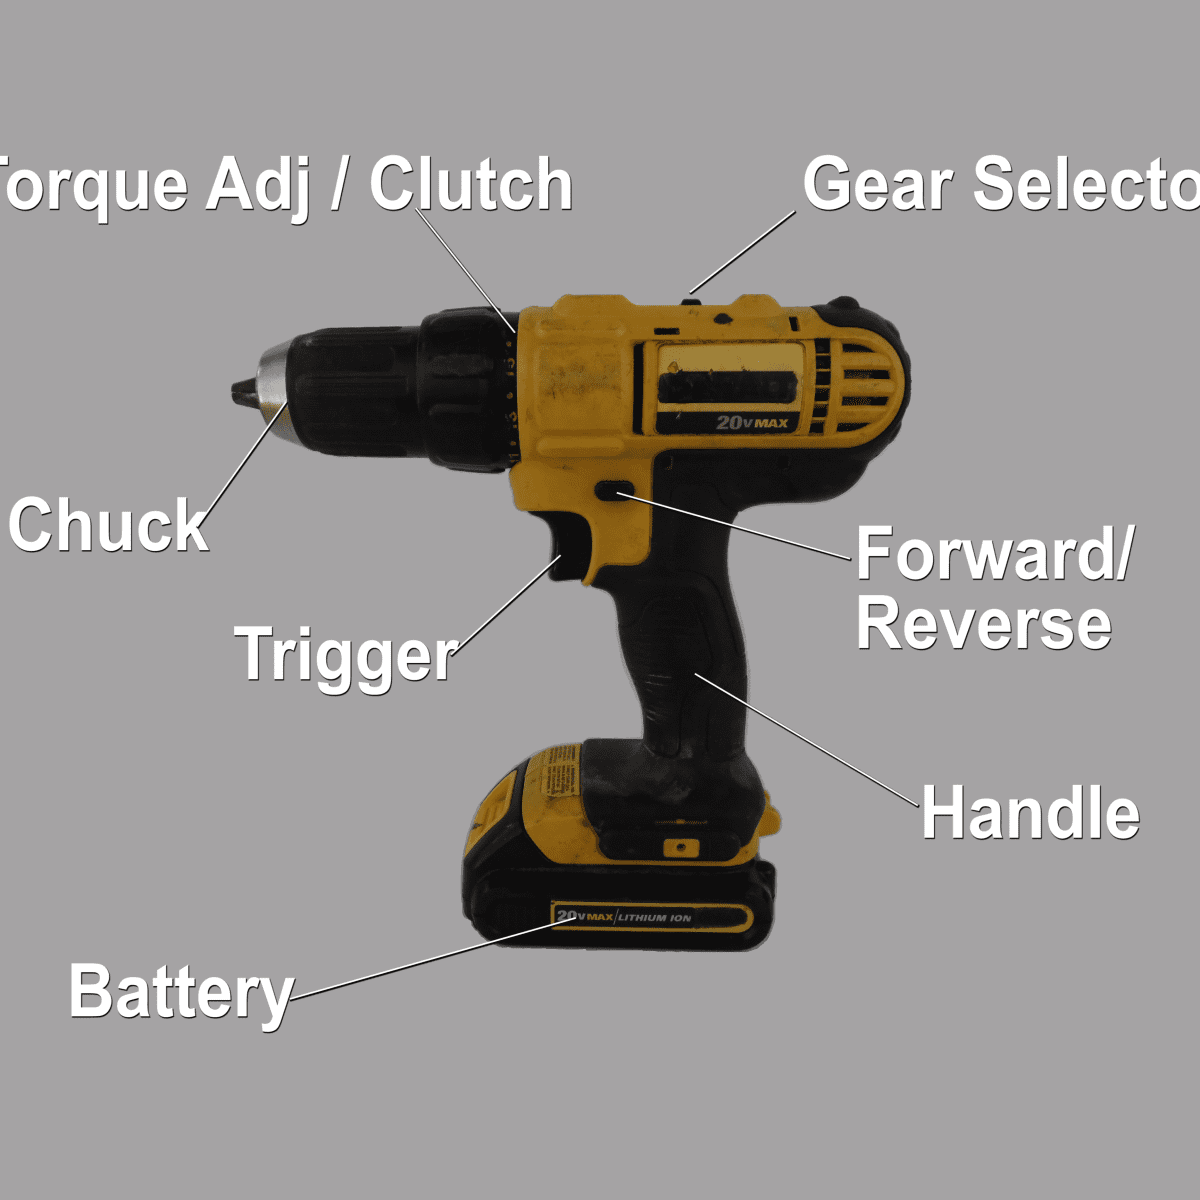 Overview of the Different Parts of a Power Drill 